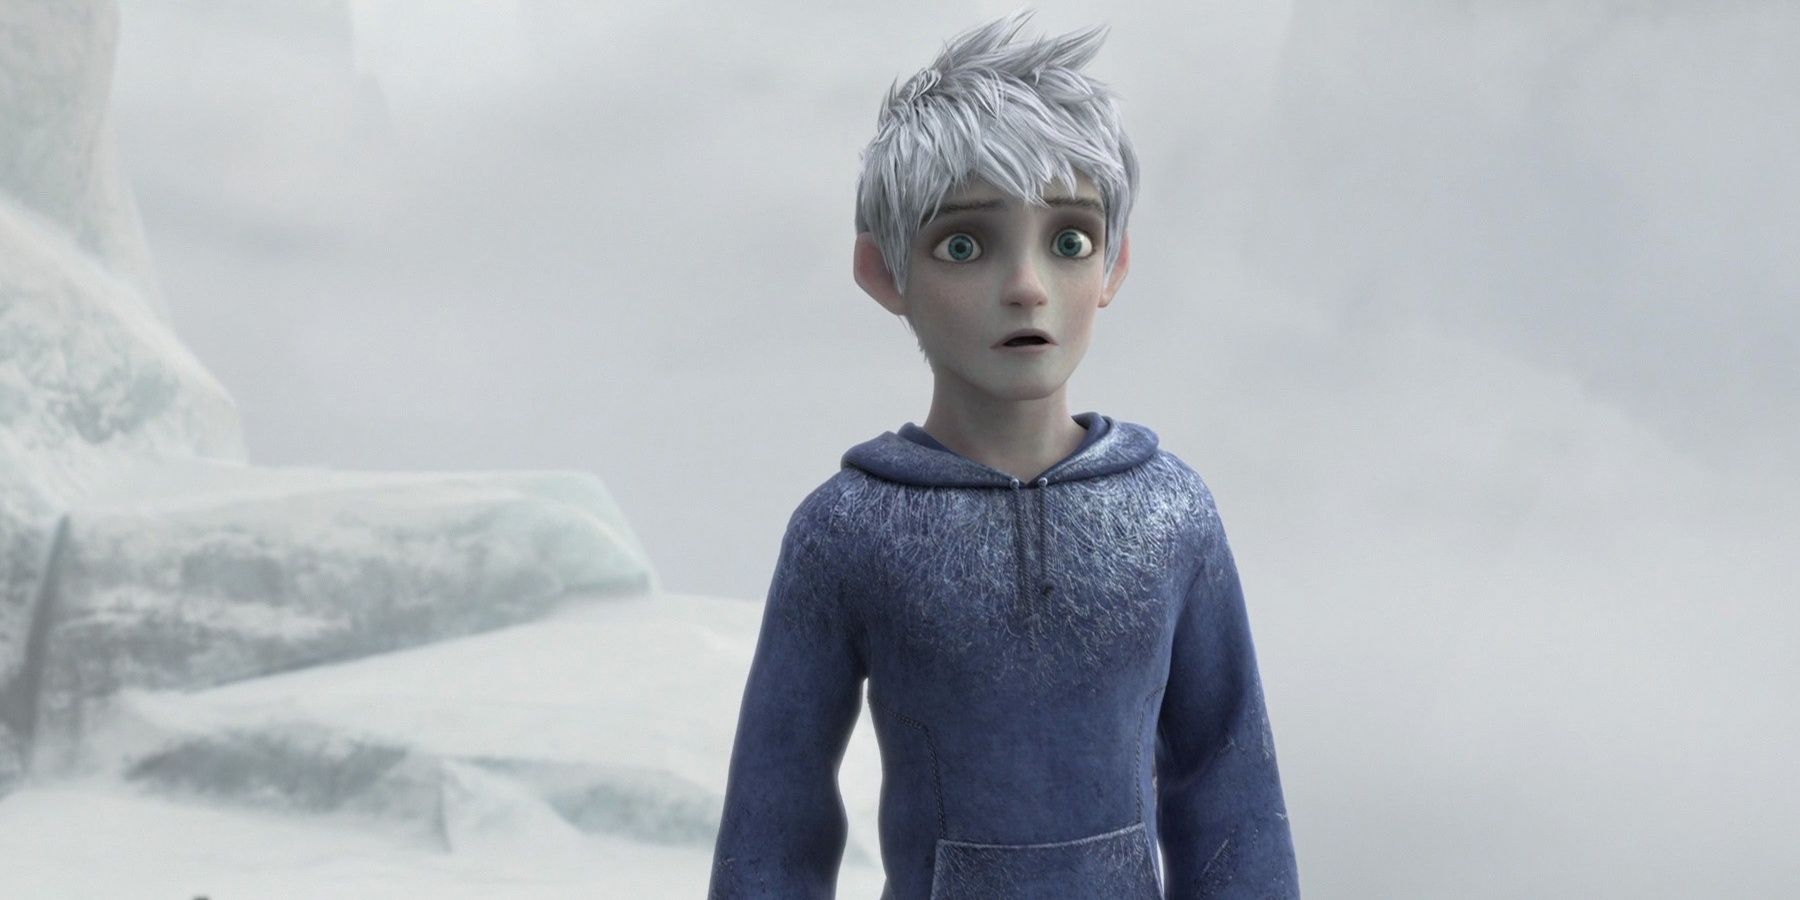 Jack Frost standing in the snow in Rise of the Guardians